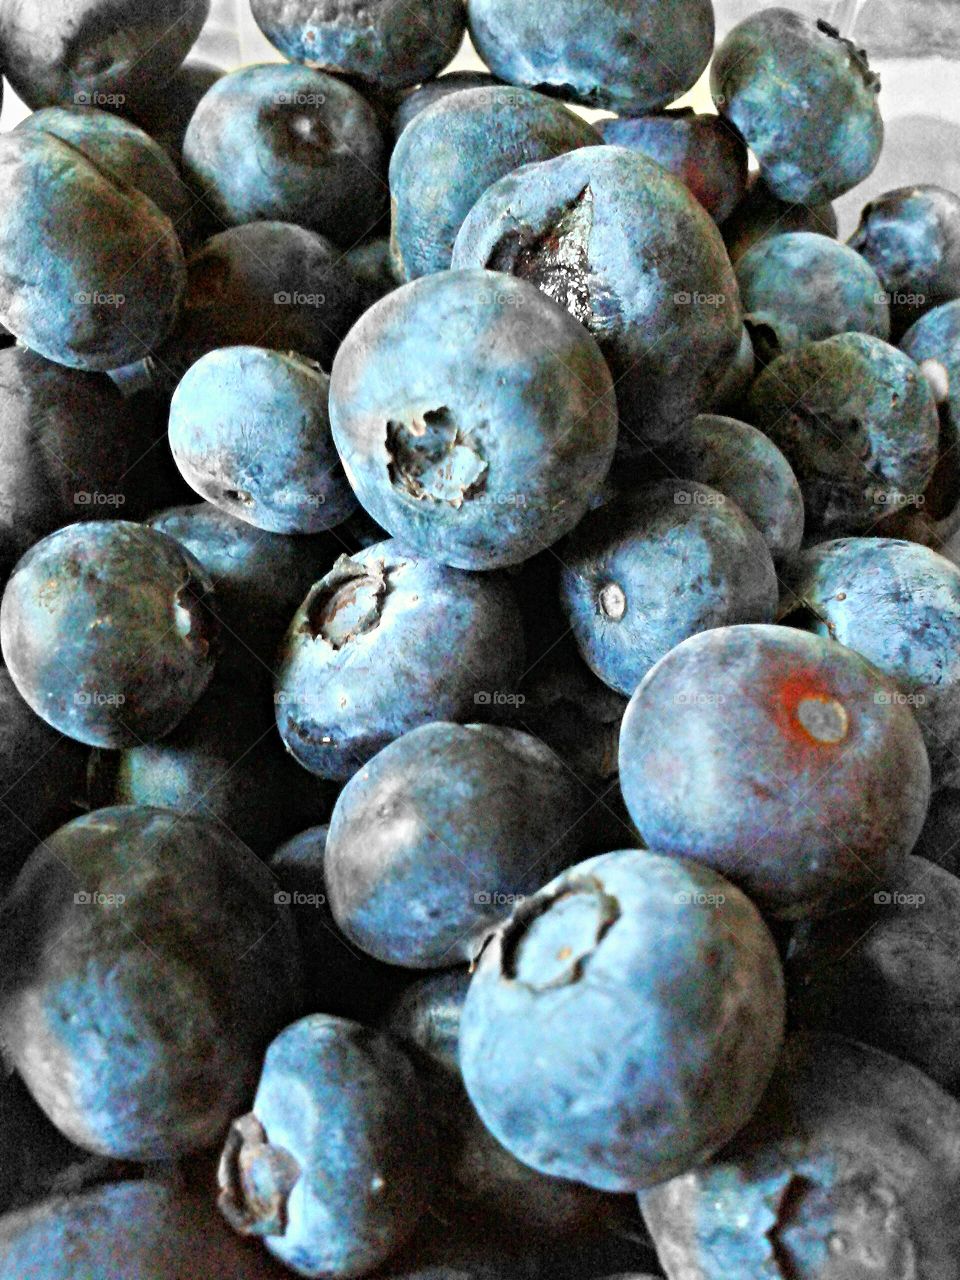 Blueberries.. A simple handful of blue.